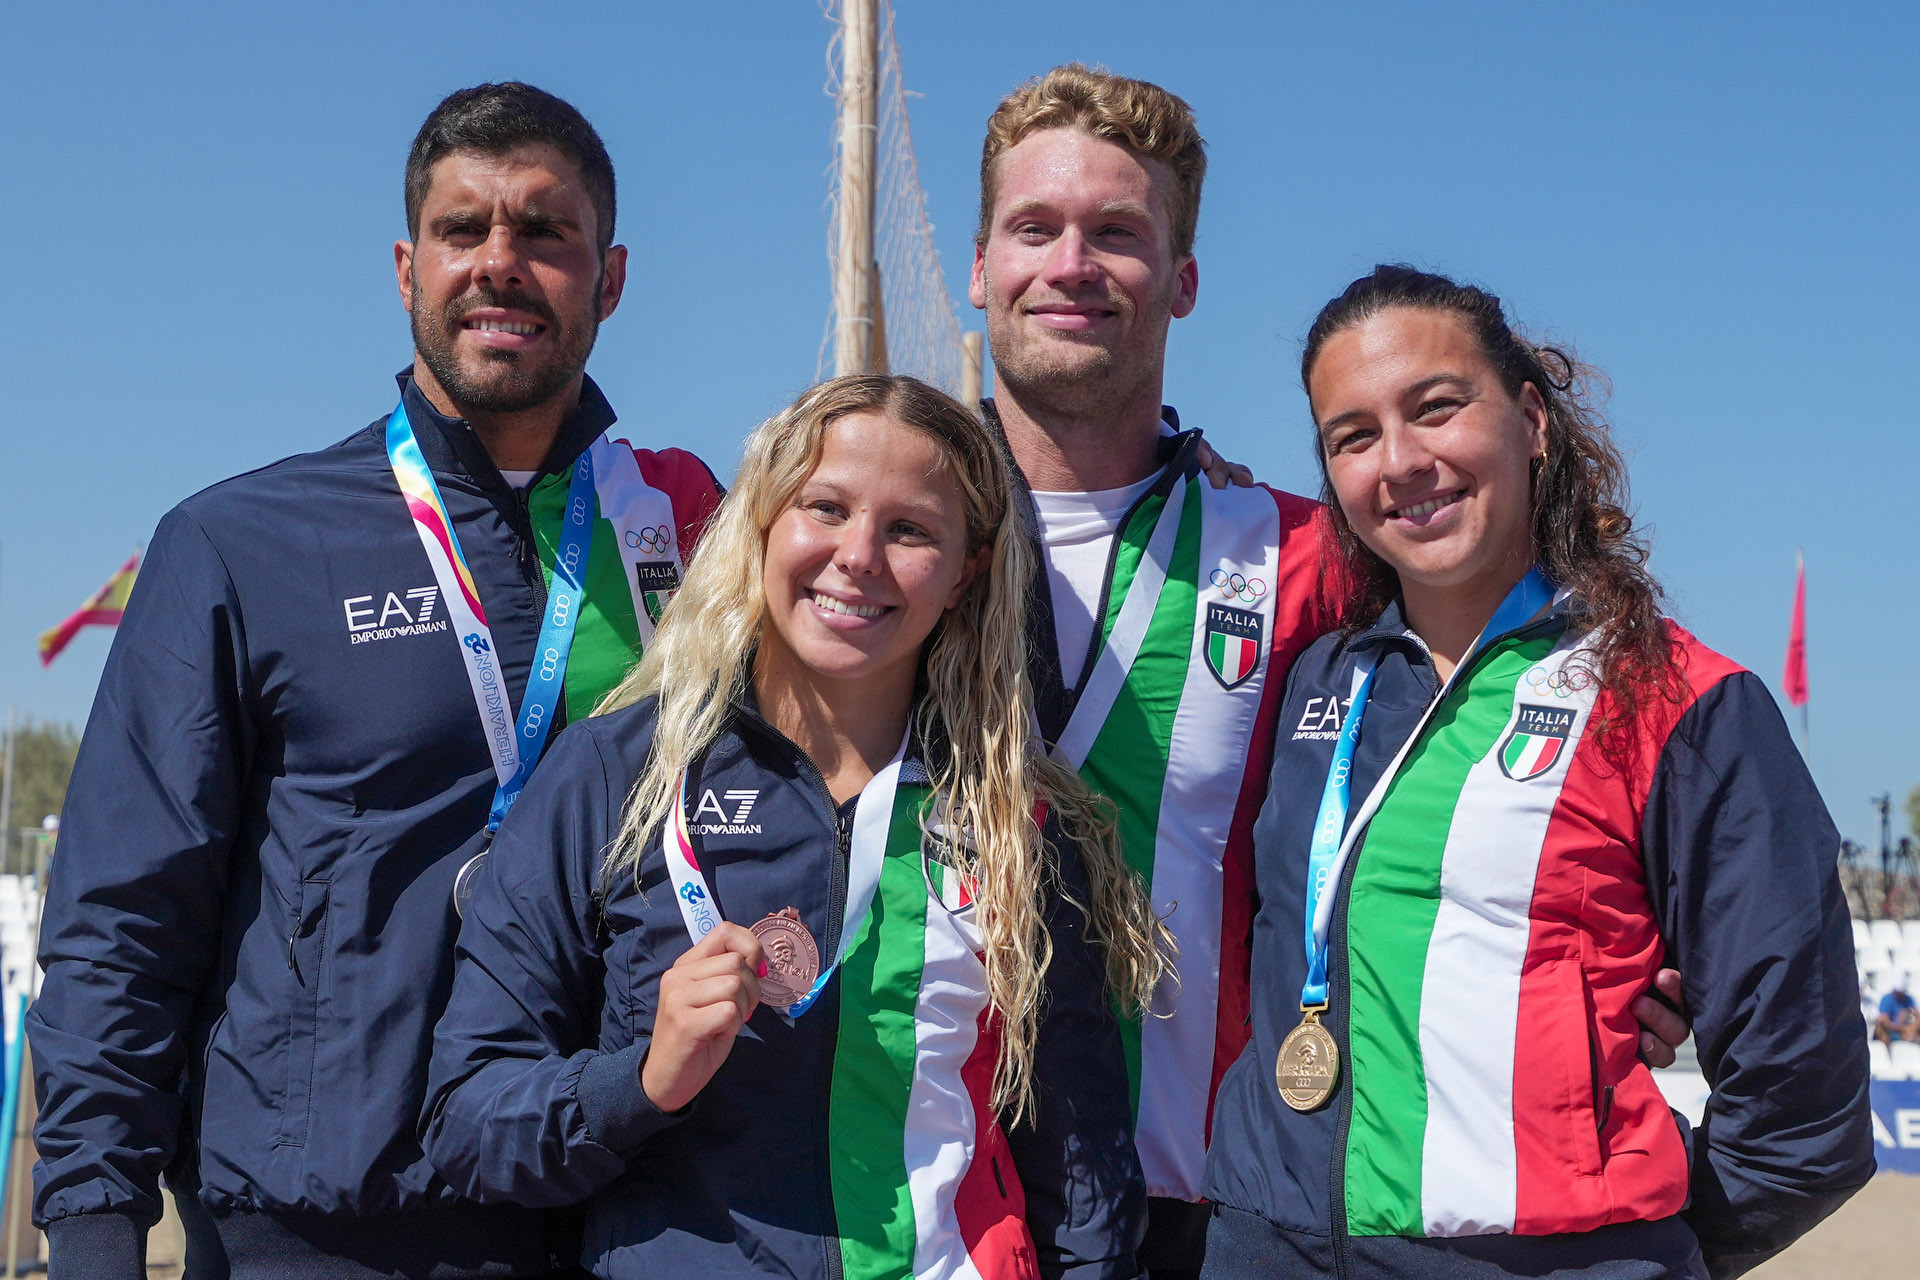 Italy monopolise open water swimming titles at Mediterranean Beach Games